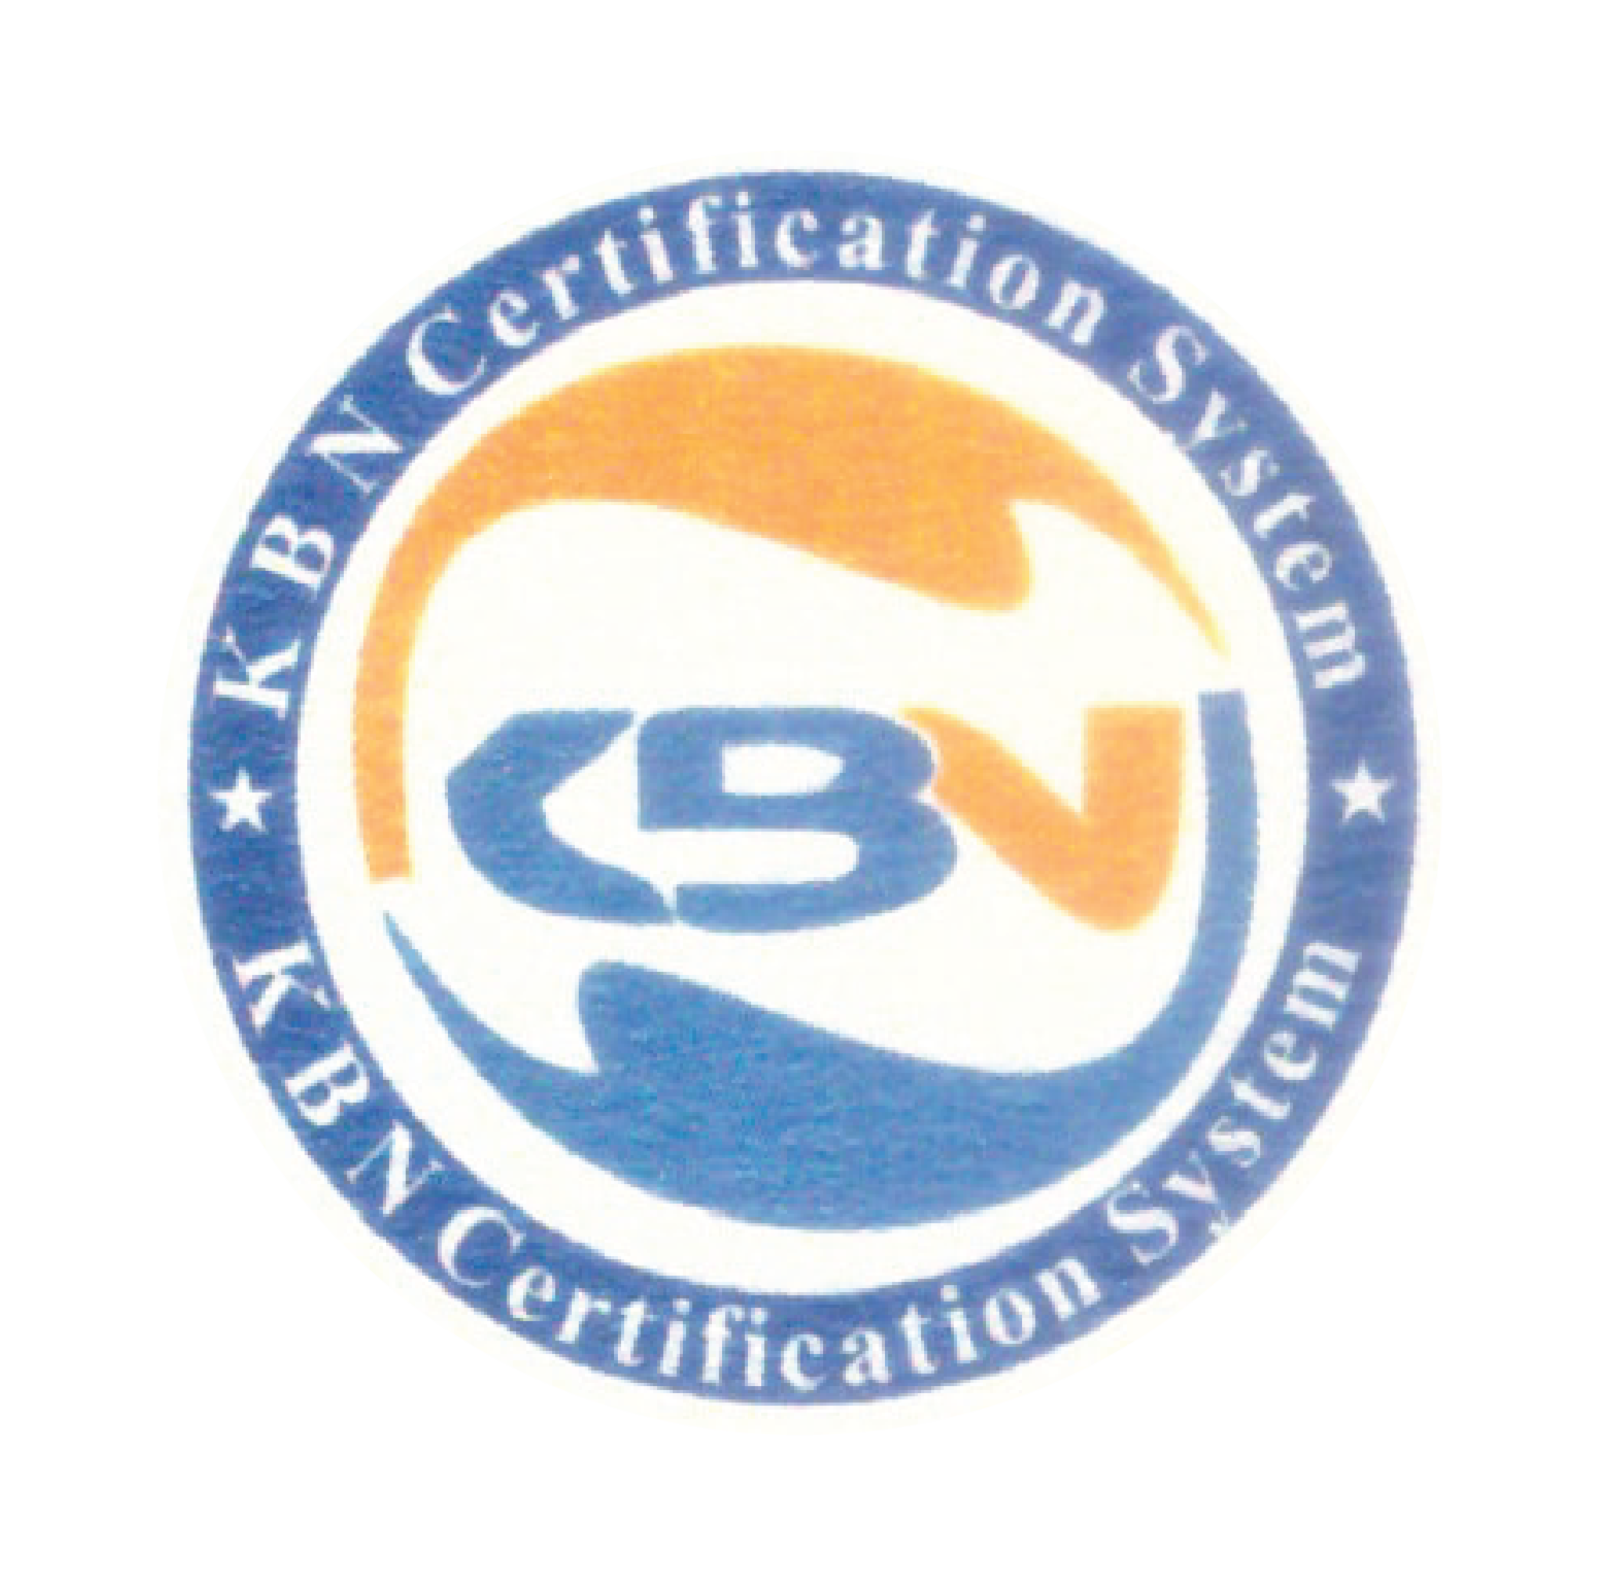 Our Certifications Credentials RUFSANGLI